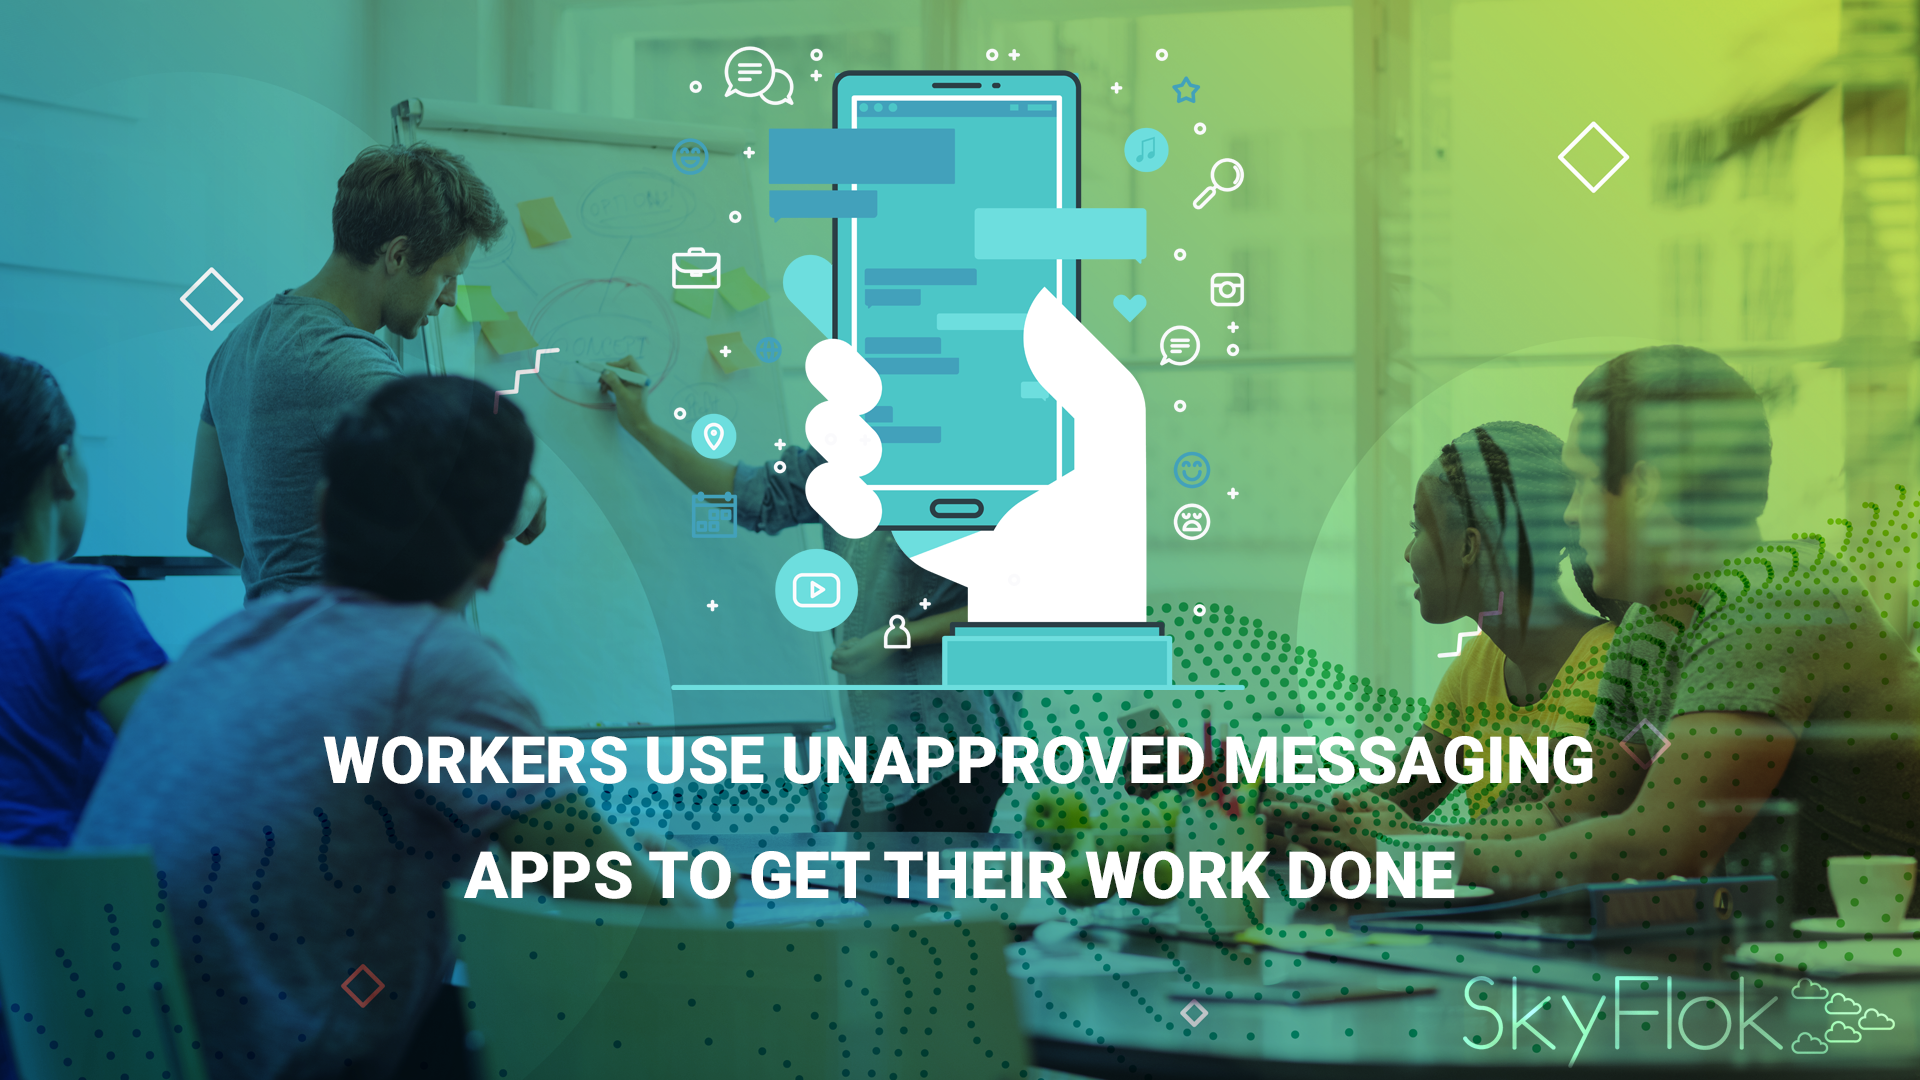 Workers use unapproved messaging apps to get their work done